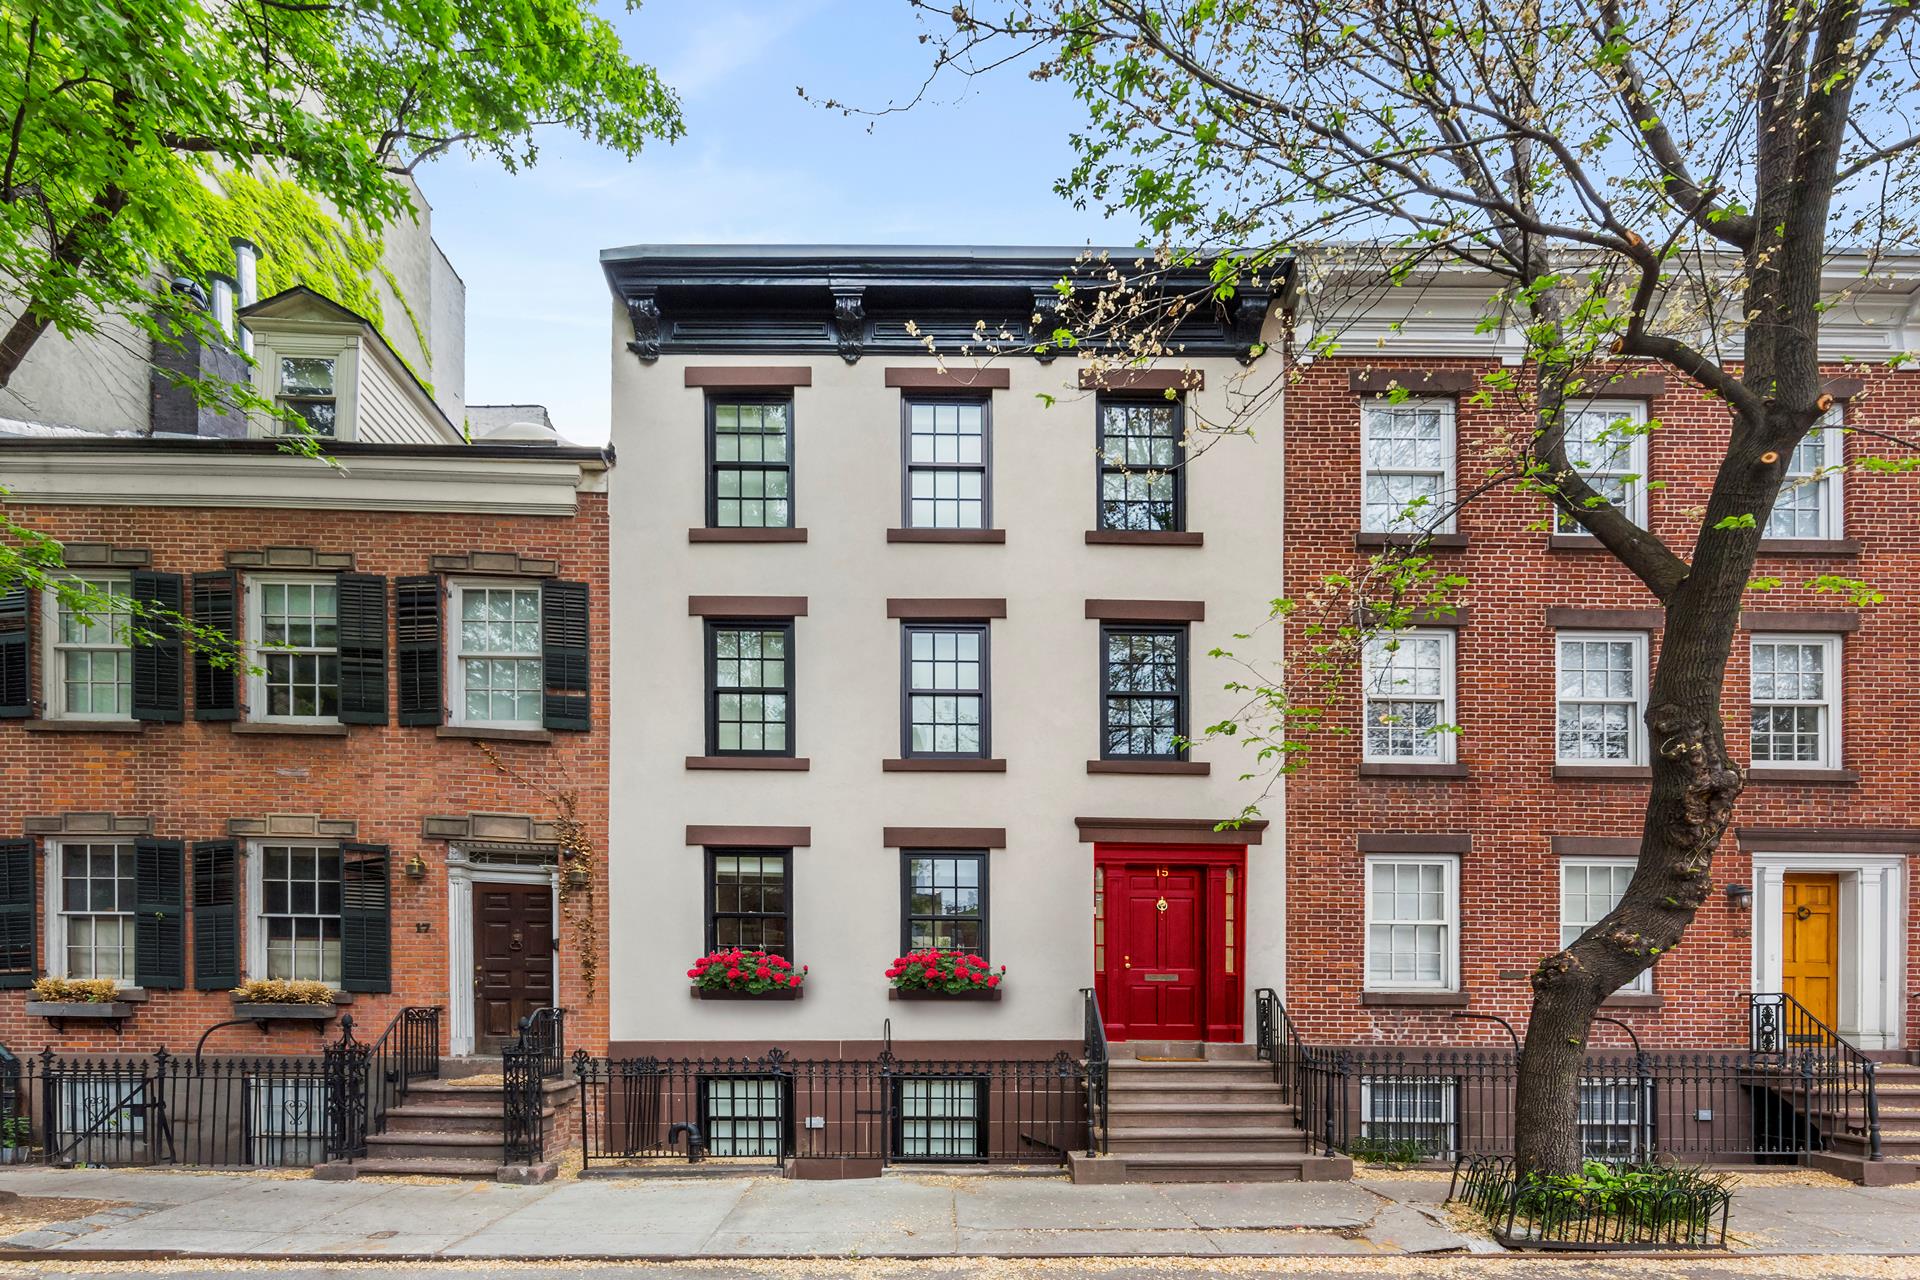 15 Commerce Street, West Village, Downtown, NYC - 3 Bedrooms  
2.5 Bathrooms  
5 Rooms - 